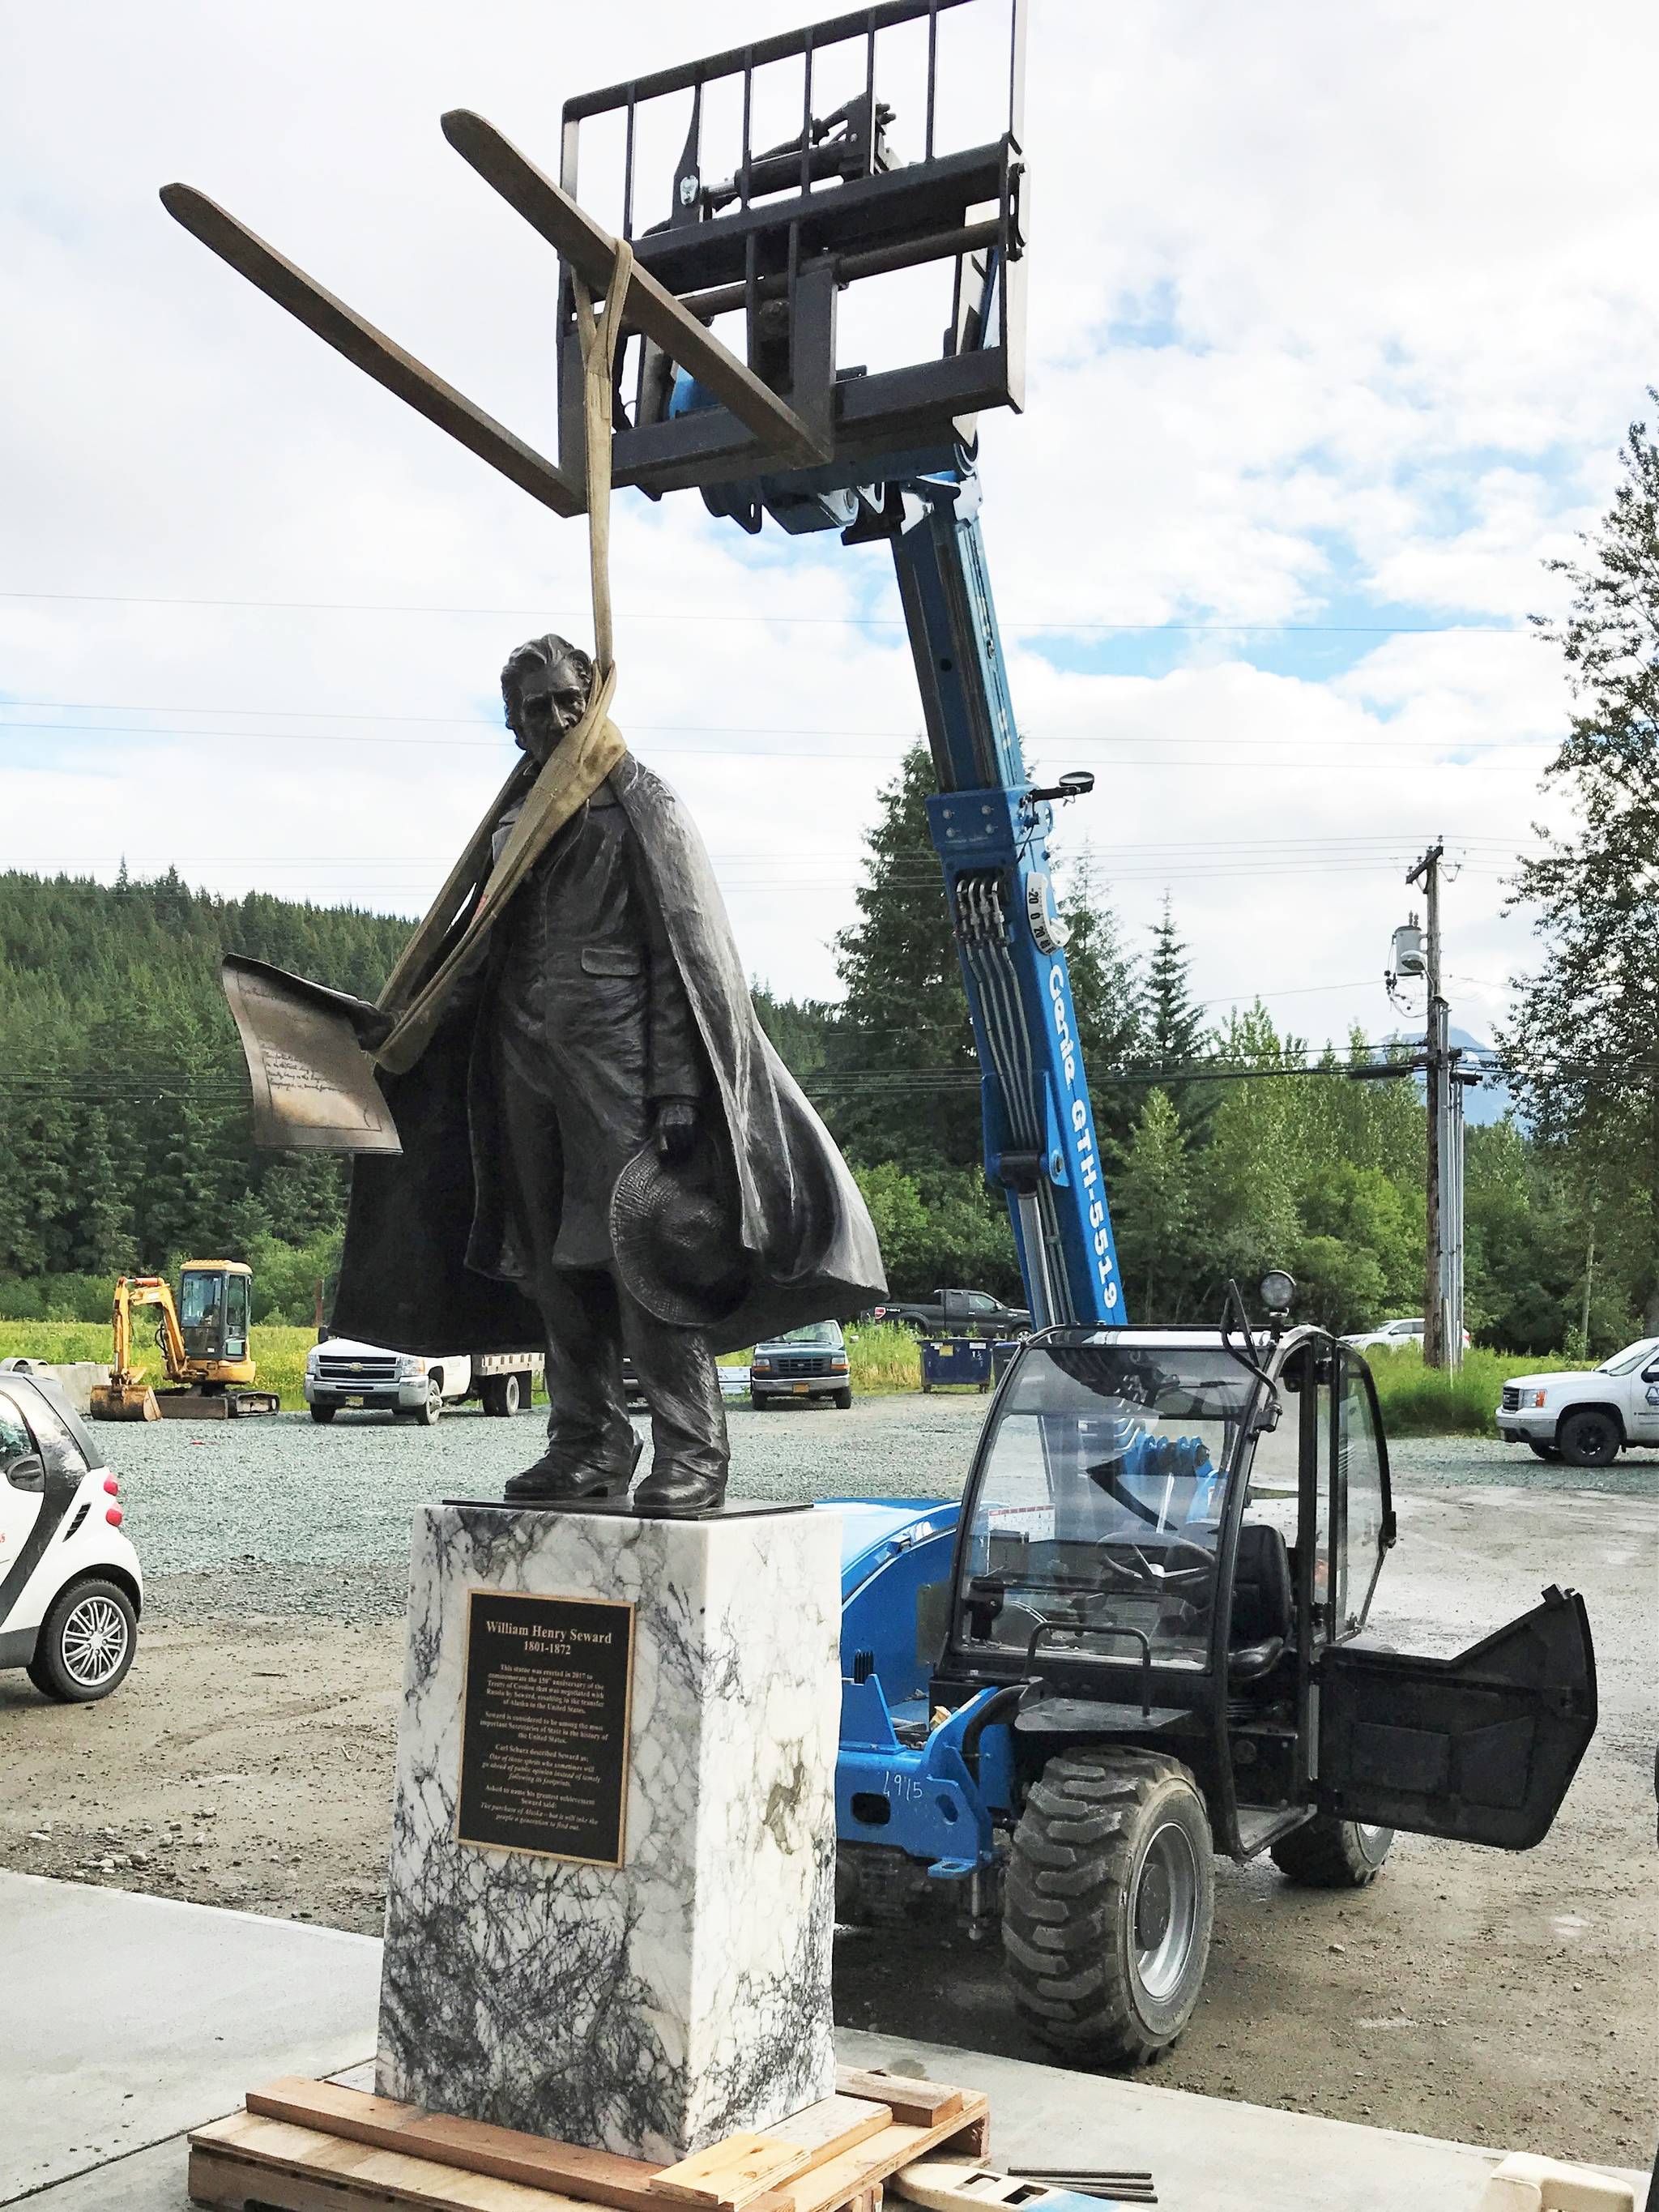 Prior to being installed in downtown Juneau, the Seward Statue goes through a “trial run” to see if it fits on its marble base. Early next week, the statue will be installed on the base at Dimond Courthouse Plaza across the street from the Juneau State Capitol before a public unveiling July 3. (Photo courtesy of Wayne Jensen)